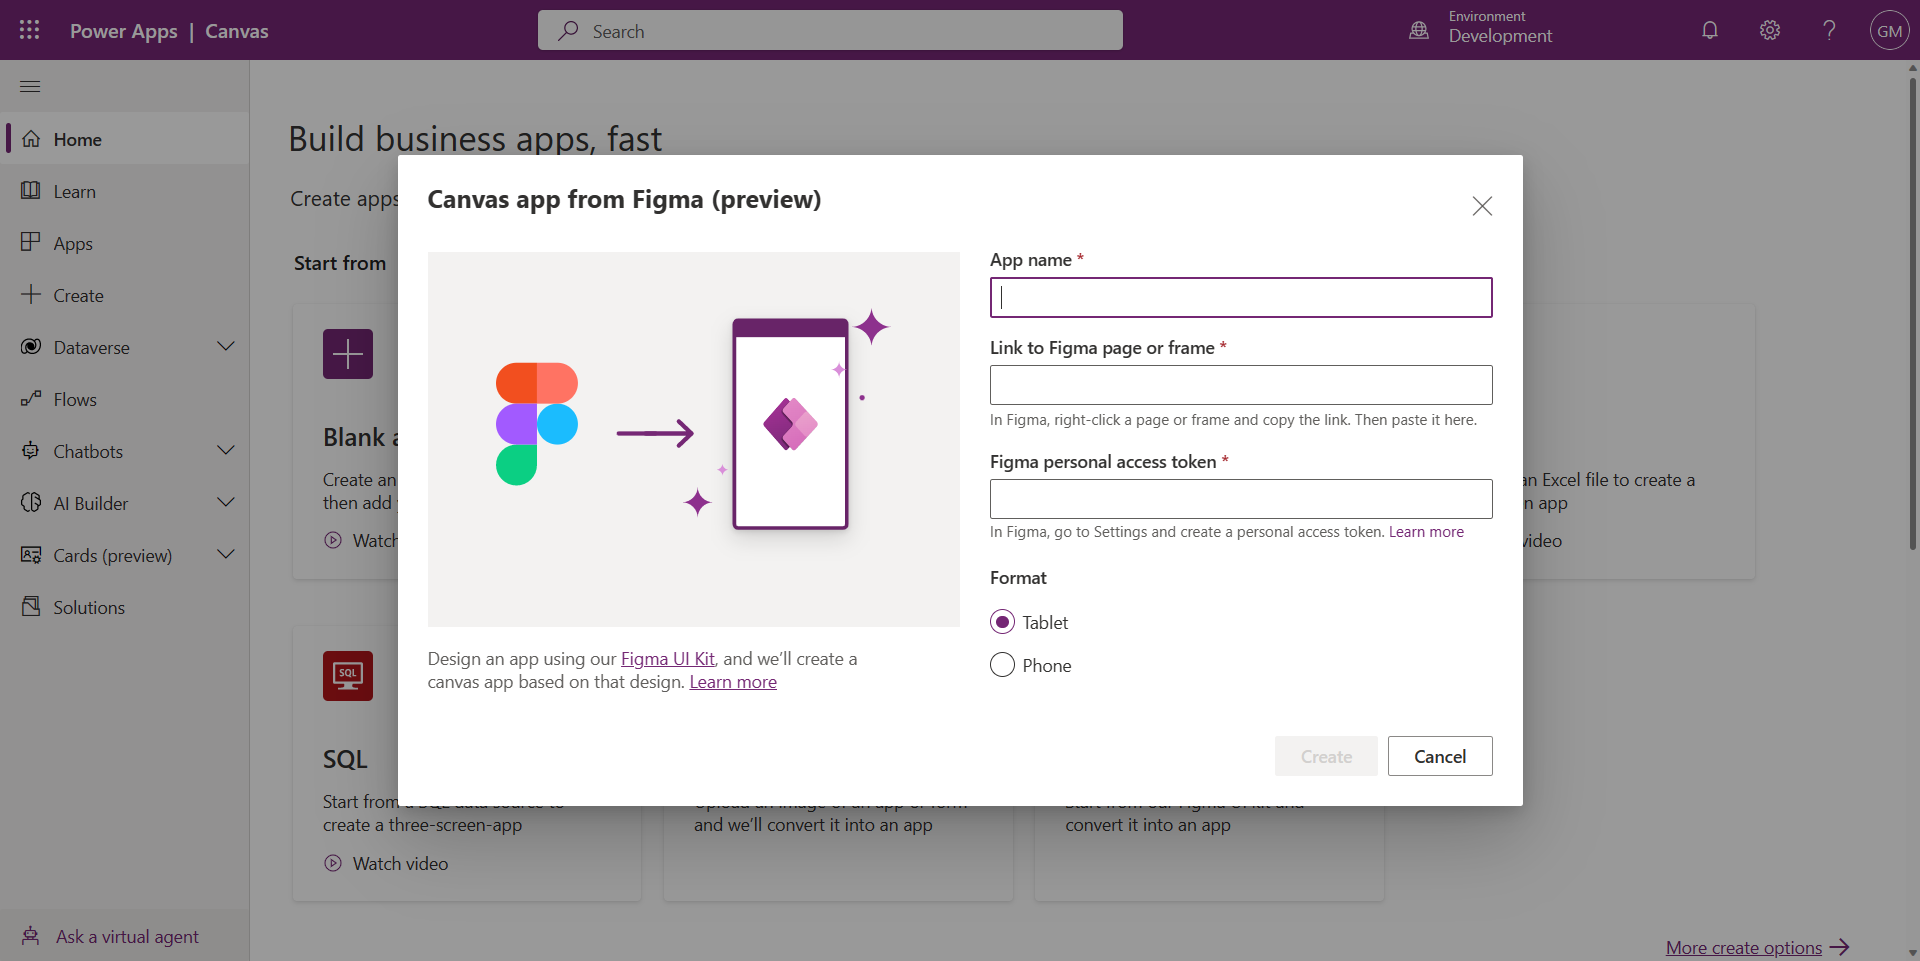 Image showing the Figma to App fucntionality in Power Apps